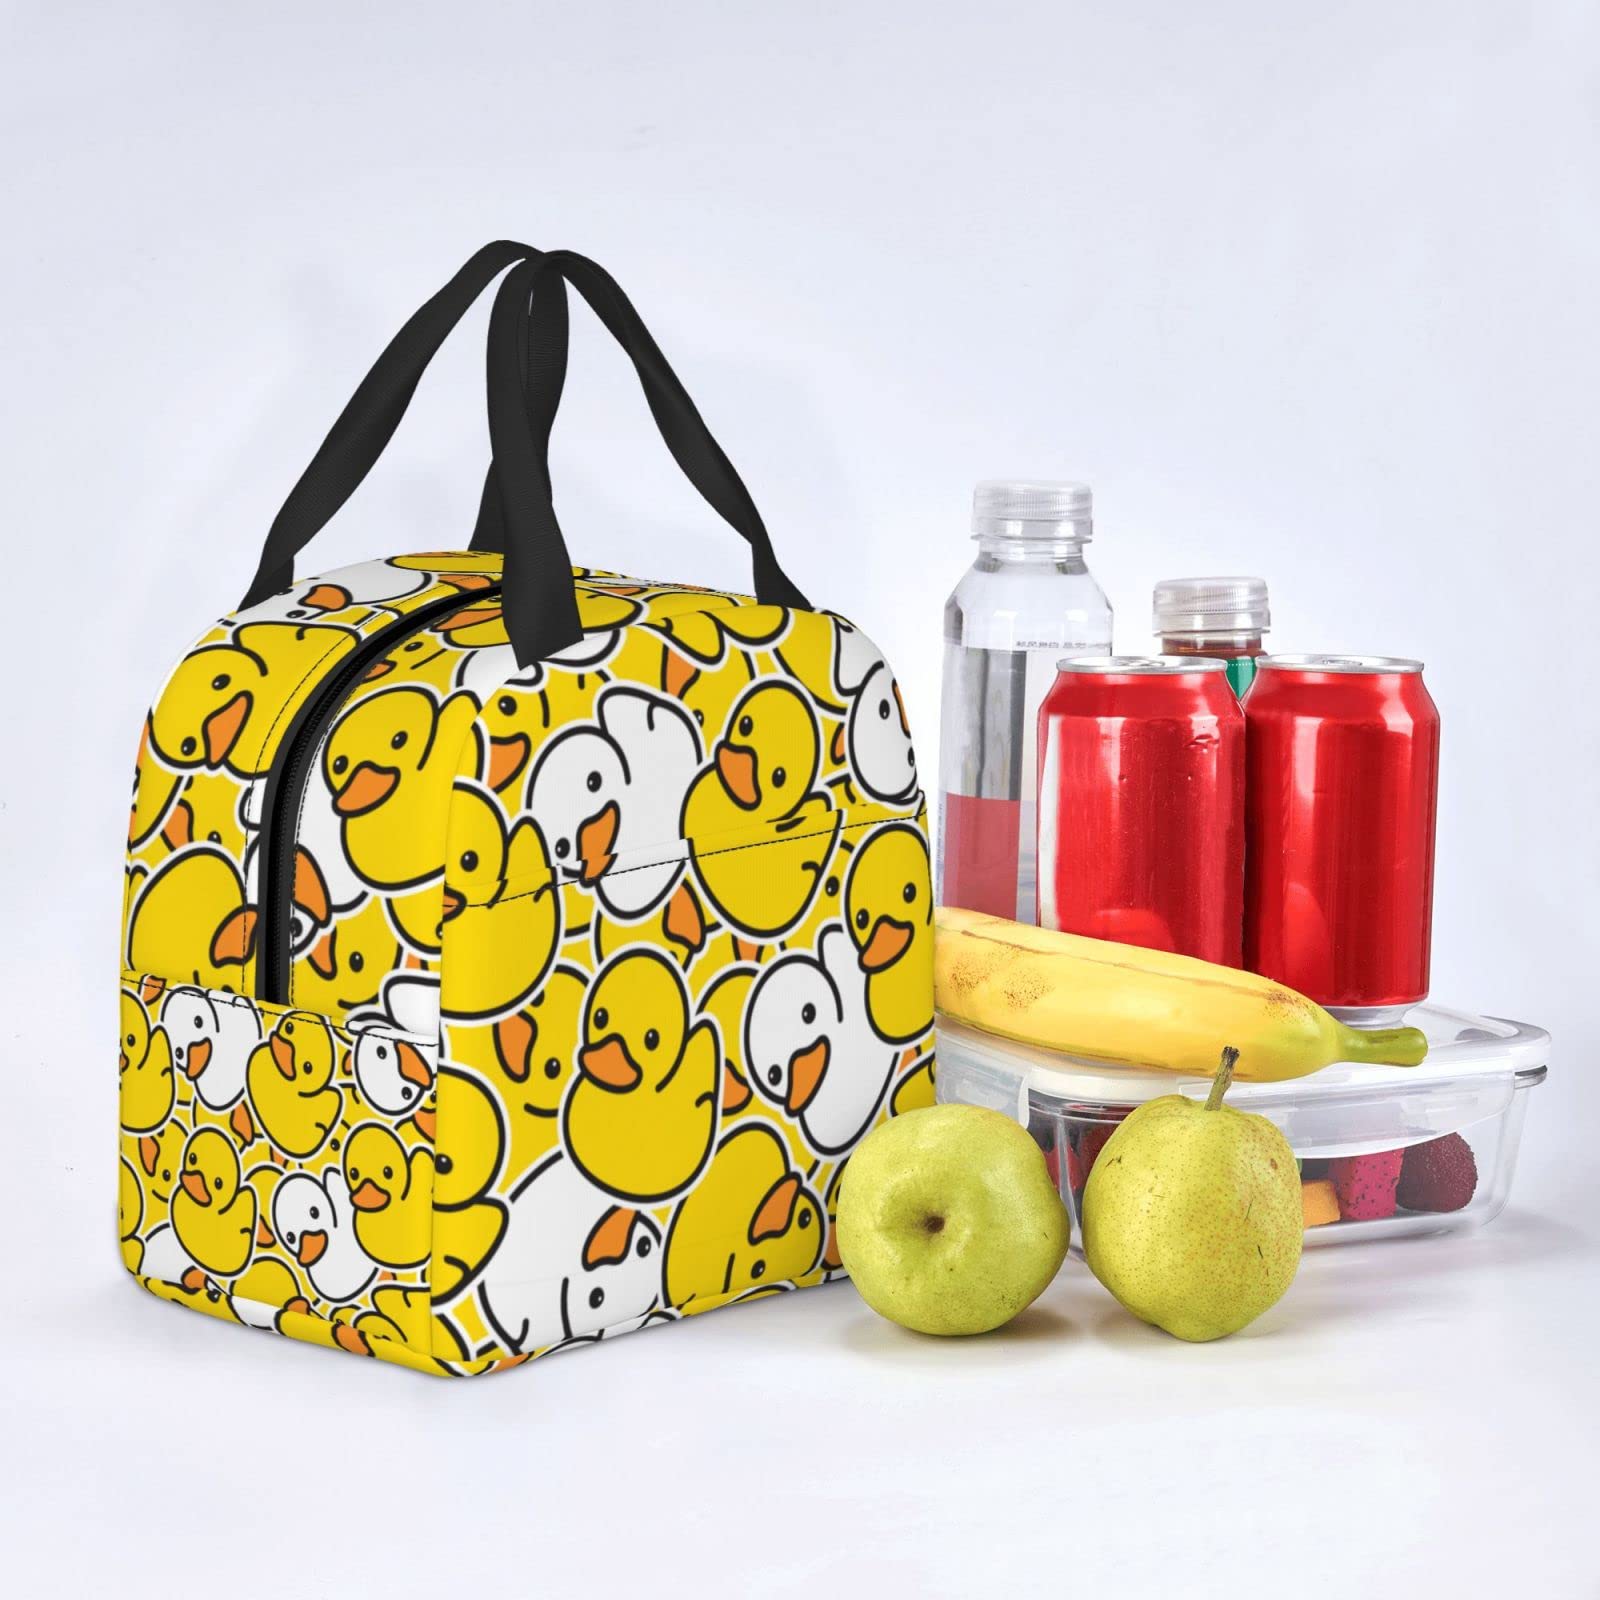 Fiokroo Lunch Bag Insulated Cute Rubber Ducks Lunch Box Cartoon Duckies Reusable Lunch Tote Bag For School Work College Outdoor Travel Picnic, 6l